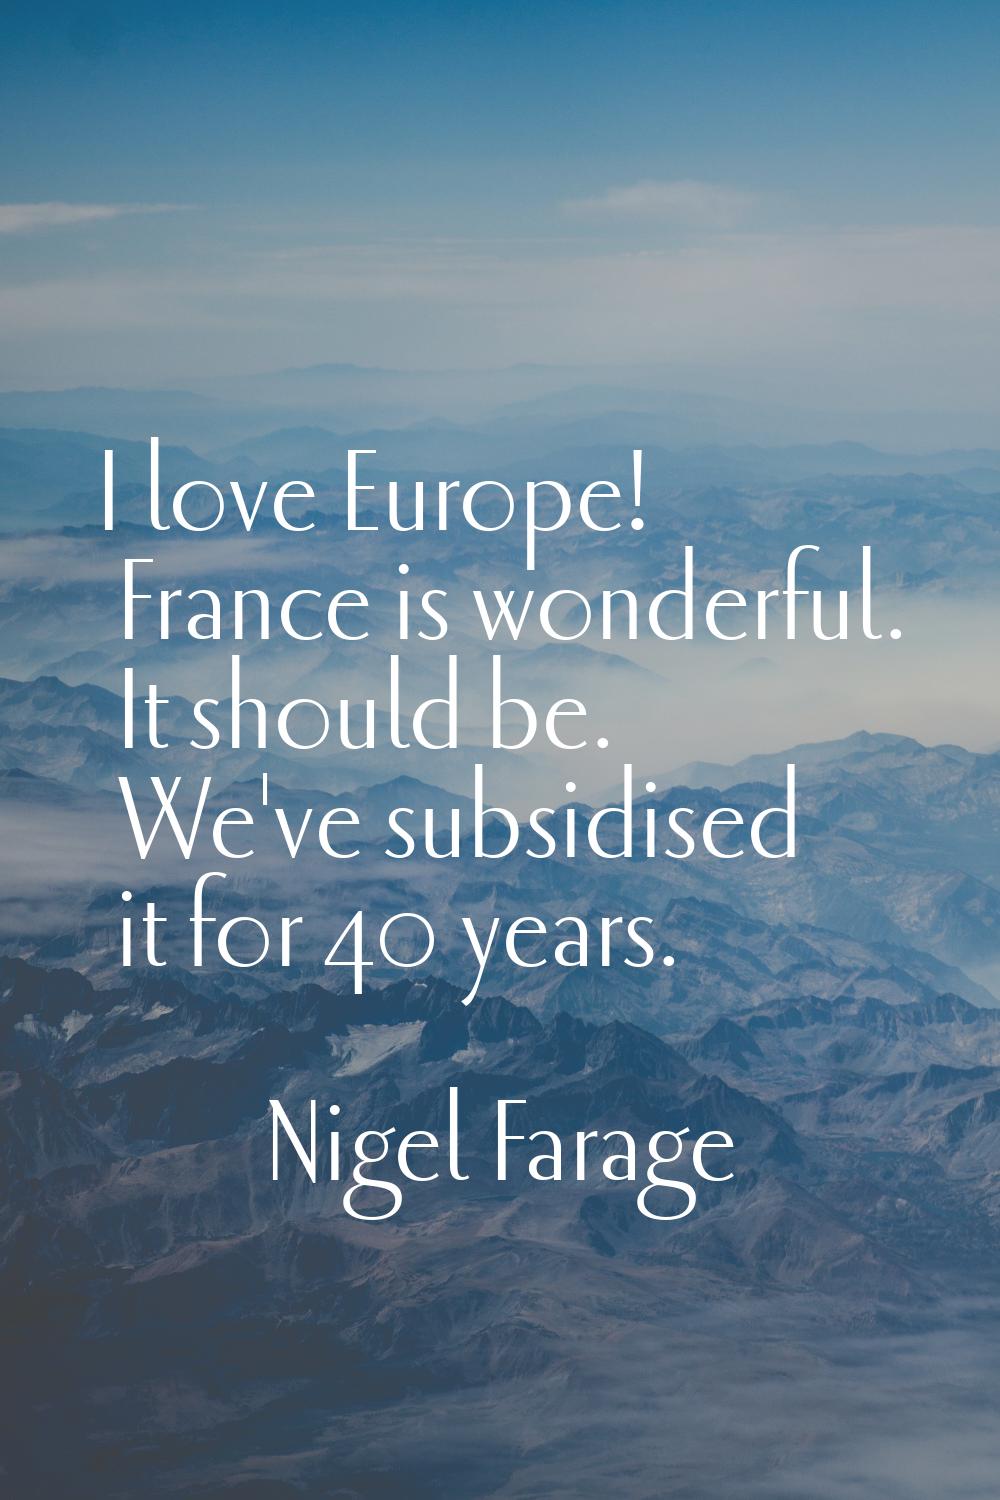 I love Europe! France is wonderful. It should be. We've subsidised it for 40 years.